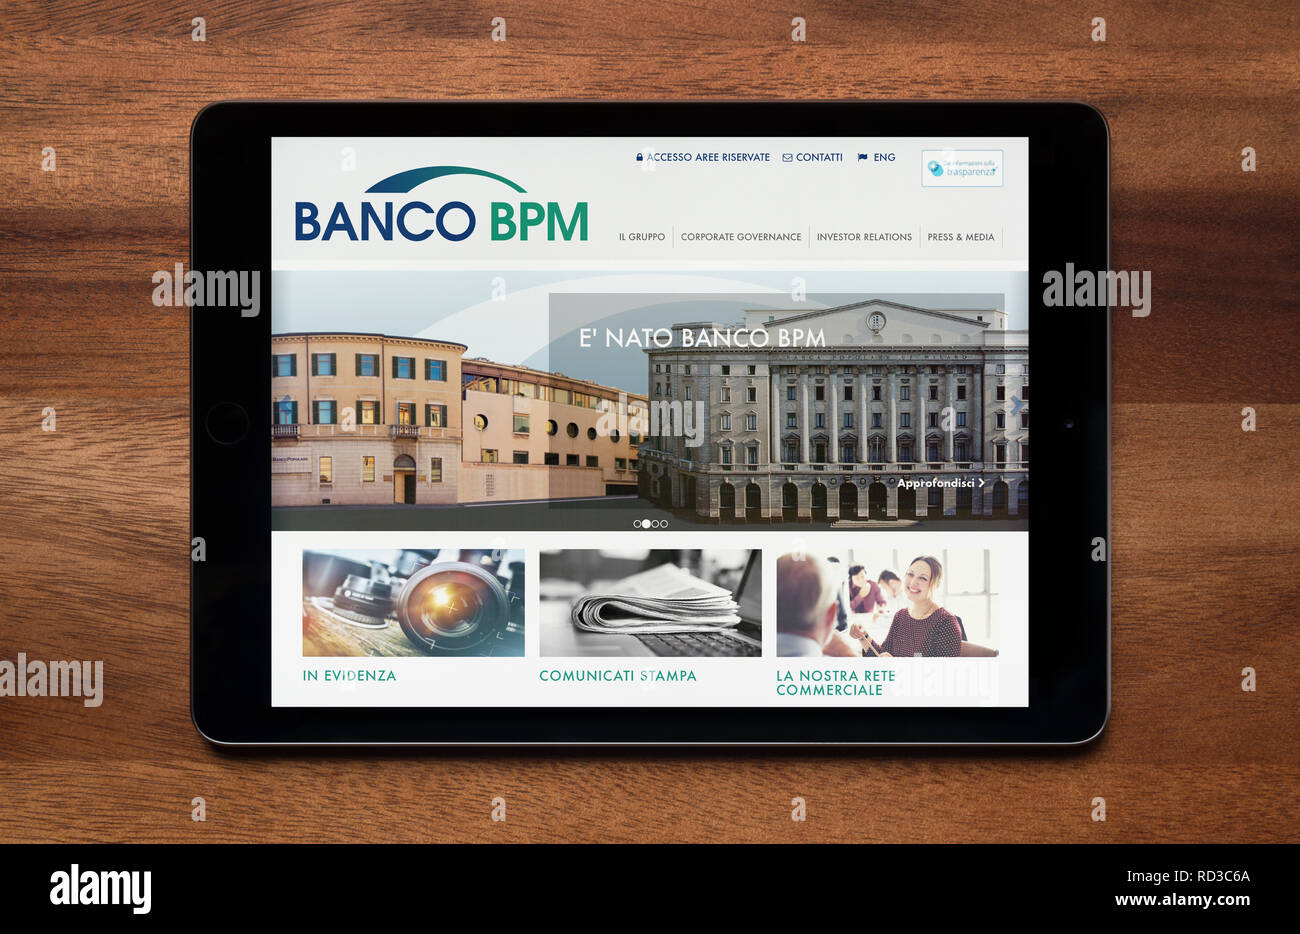 The website of Banco BPM is seen on an iPad tablet, which is resting on a wooden table (Editorial use only). Stock Photo